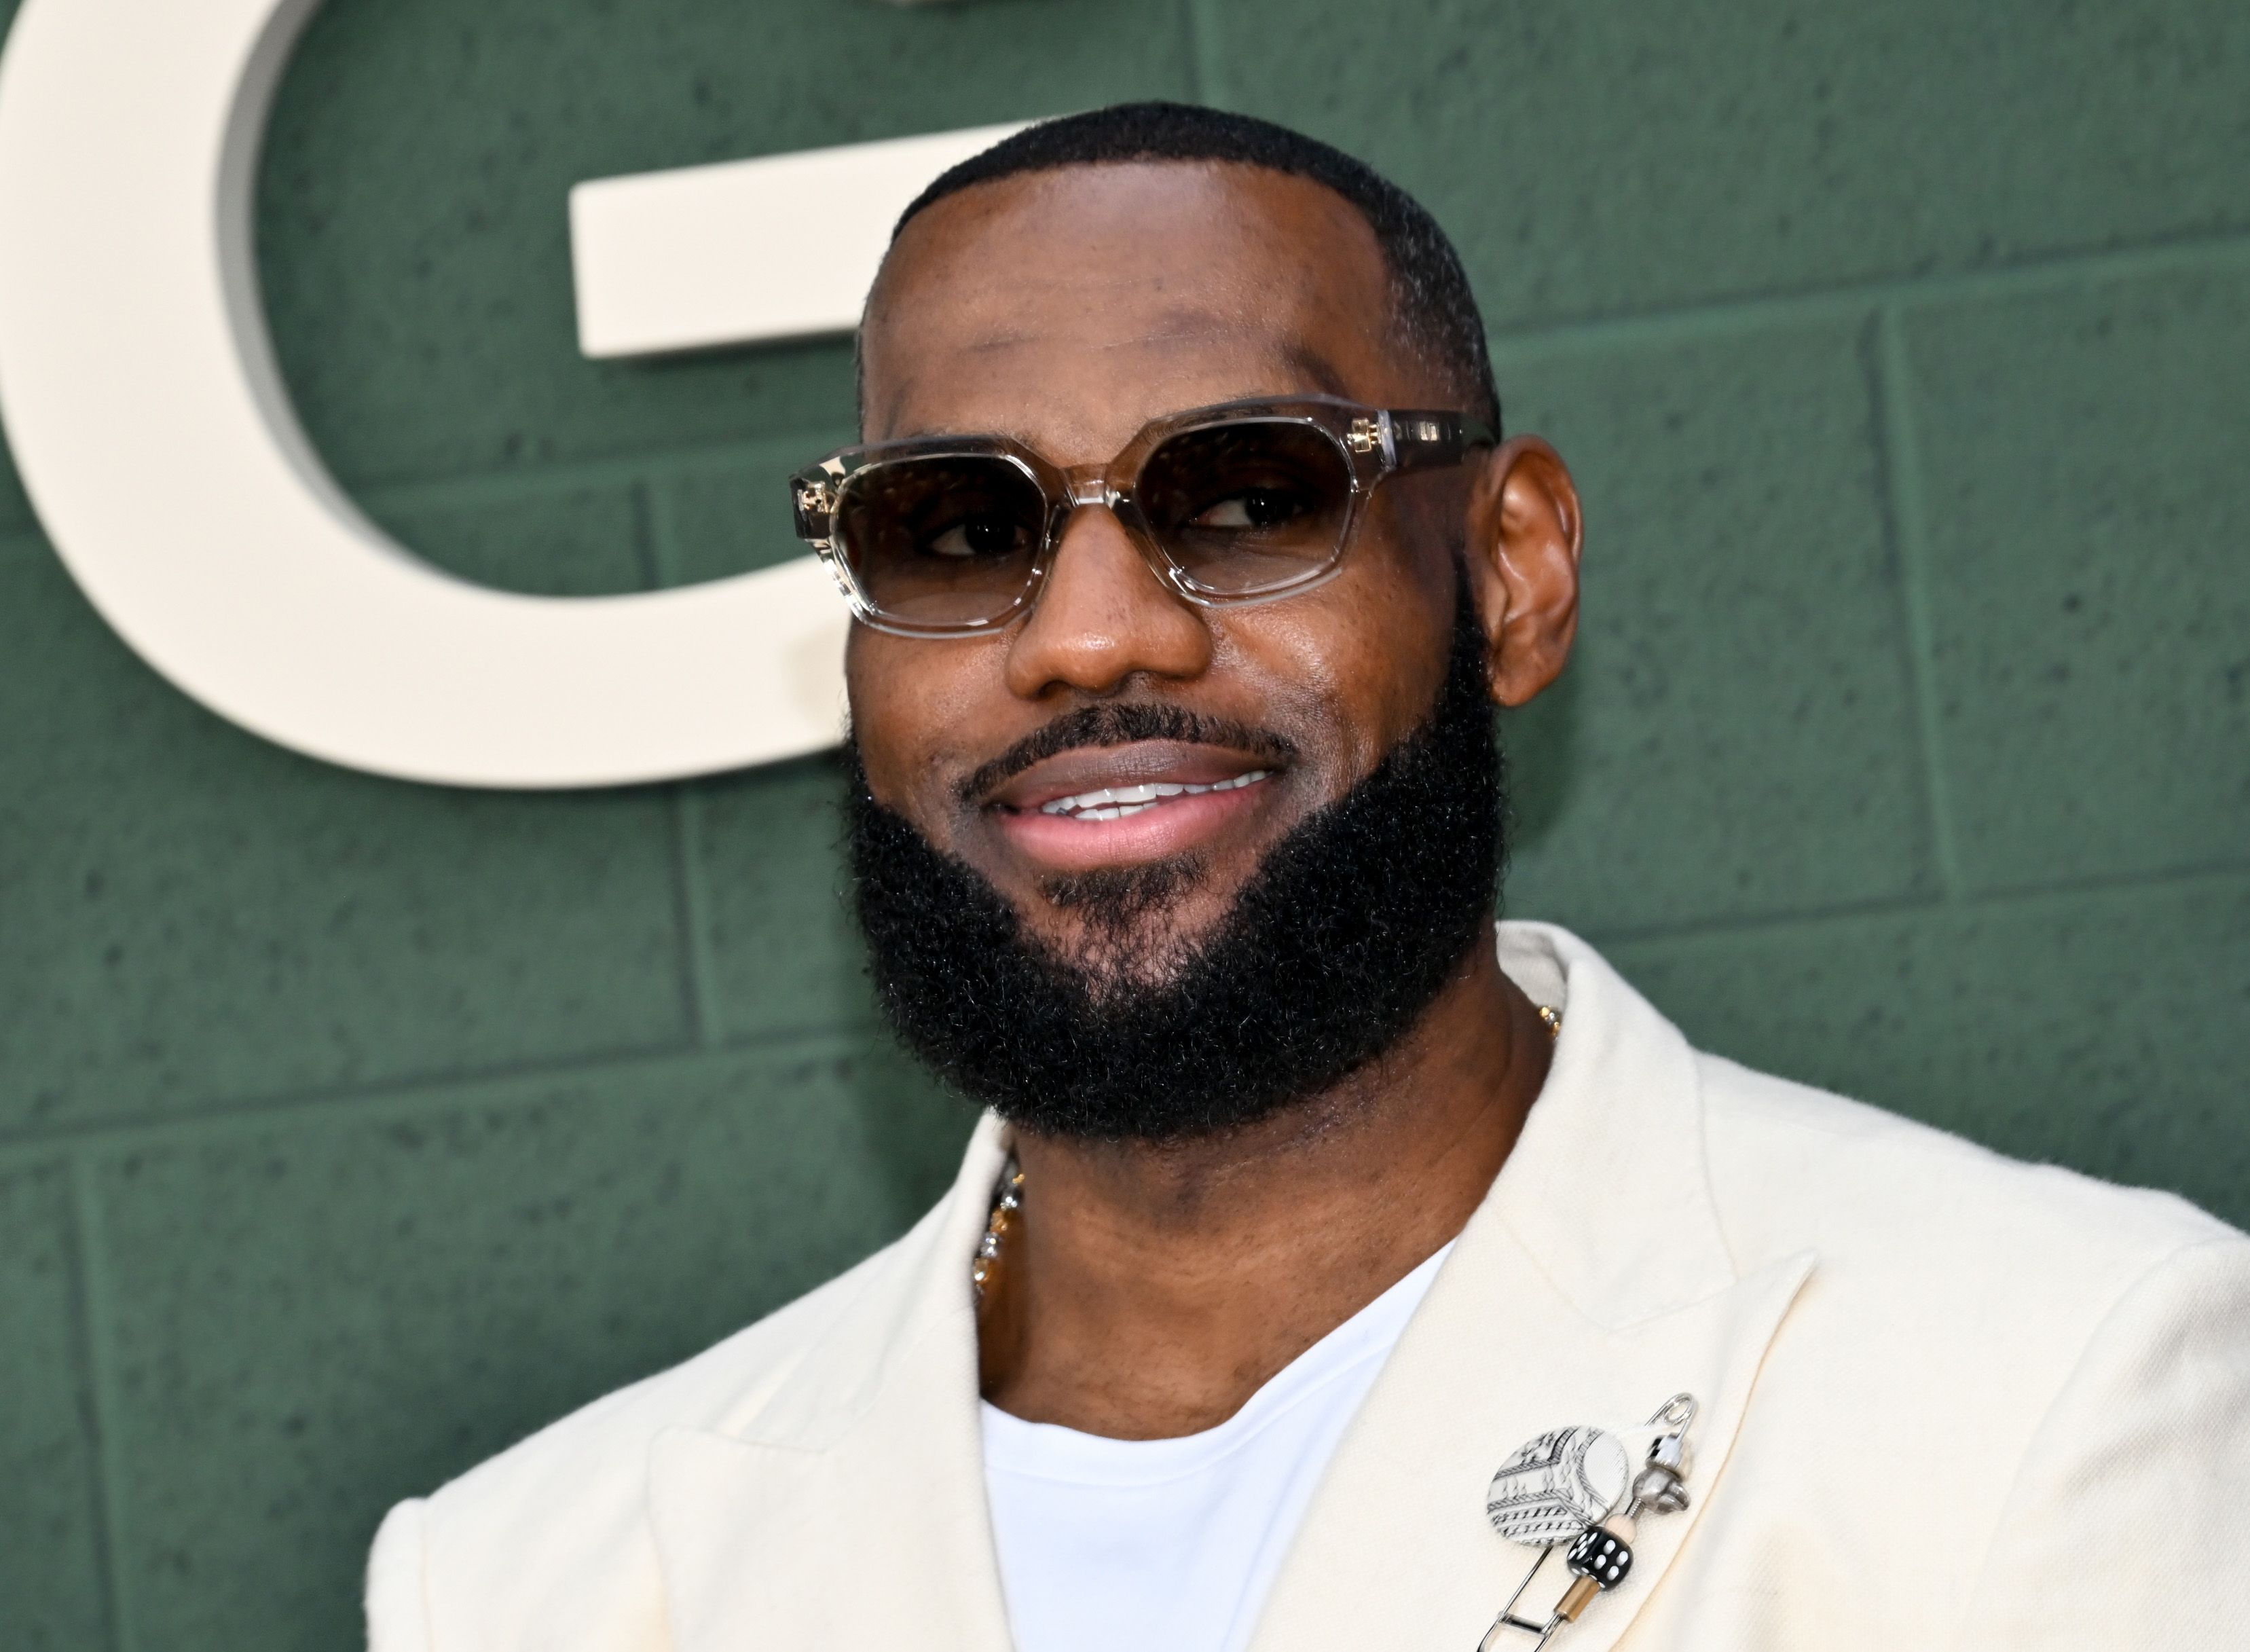 https://hips.hearstapps.com/hmg-prod/images/lebron-james-at-the-premiere-of-shooting-stars-held-on-may-news-photo-1686158518.jpg